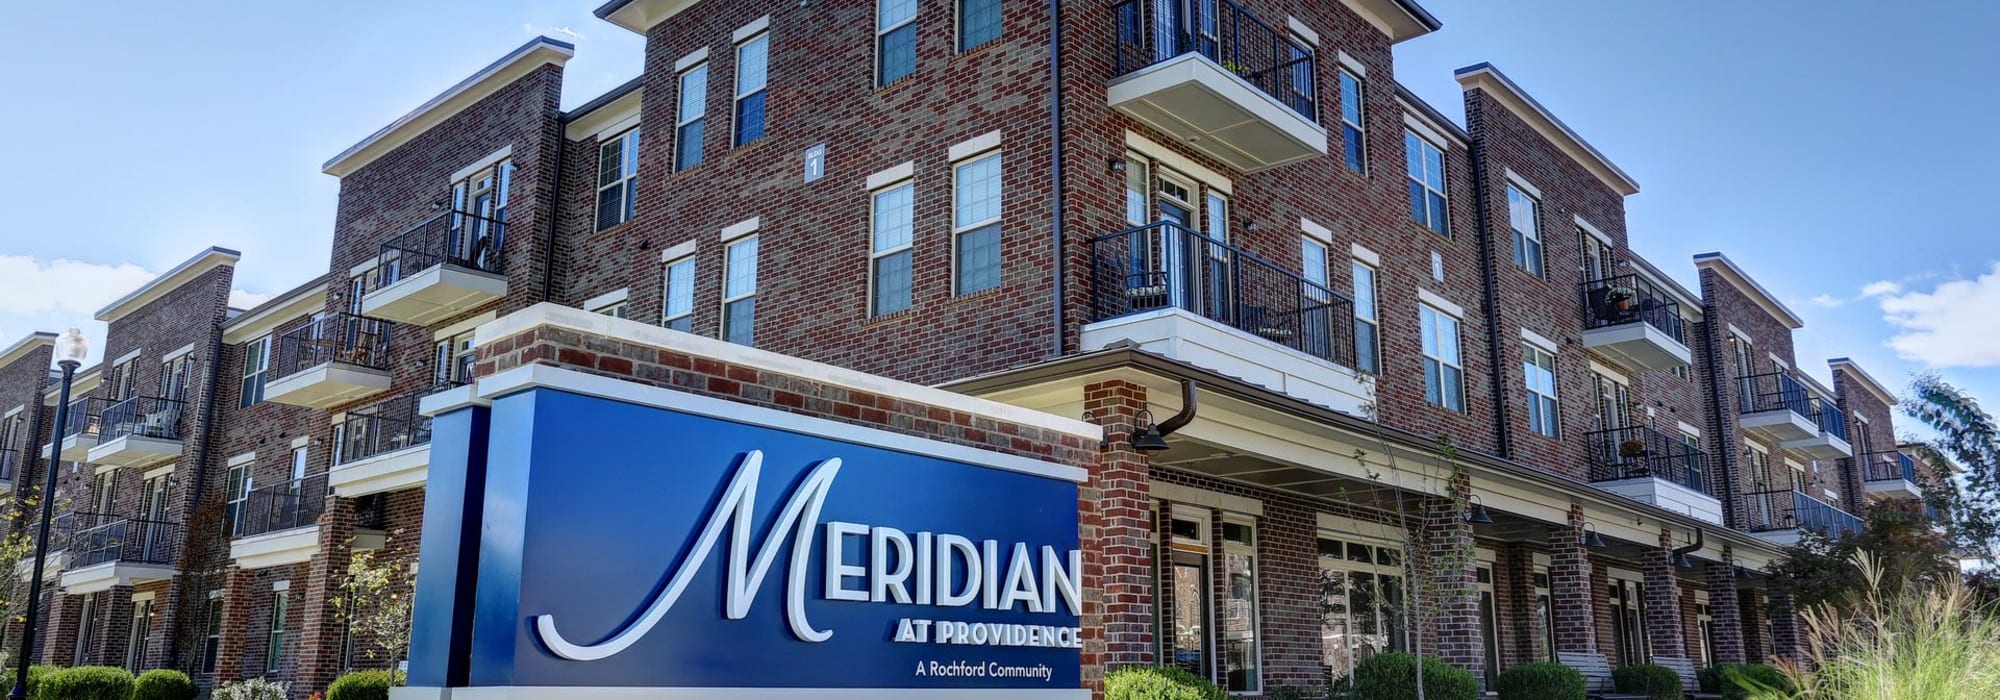 Building exterior at Meridian at Providence in Mt. Juliet, Tennessee